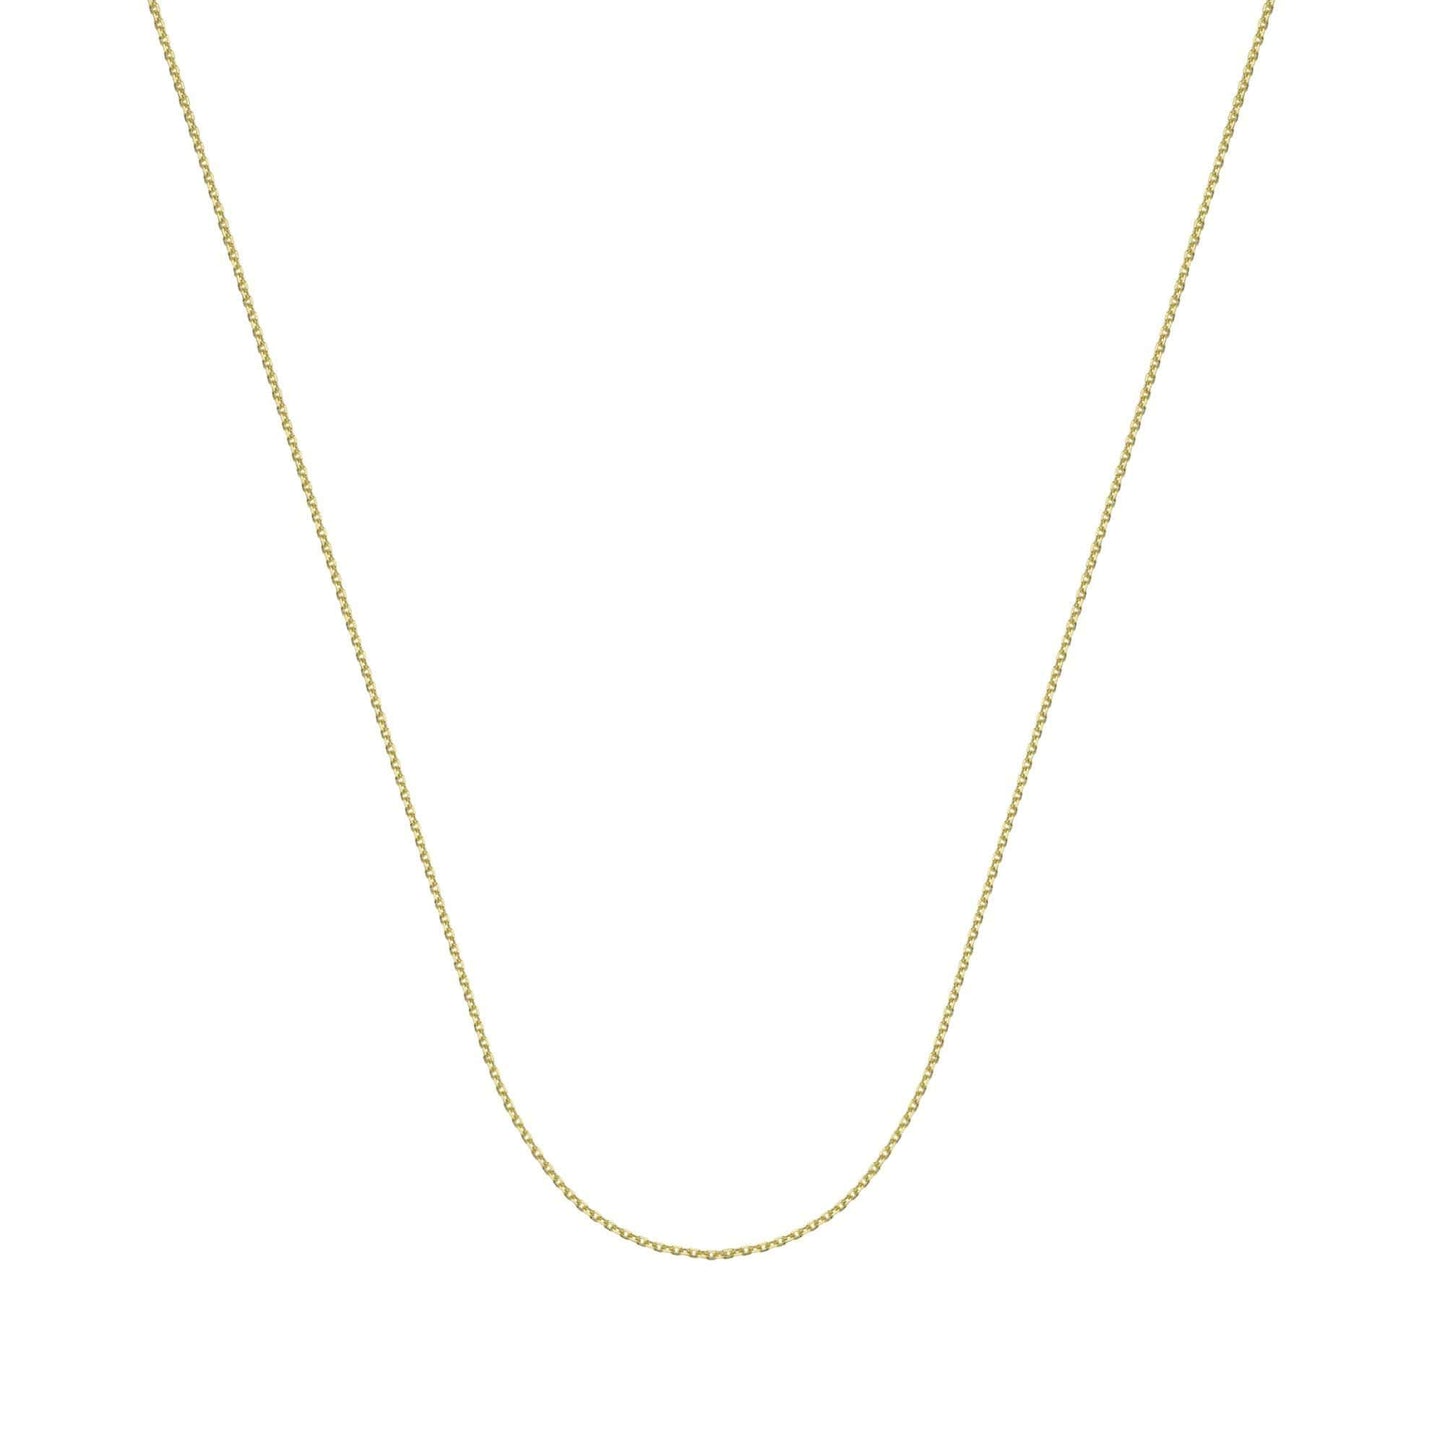 14K Gold 1.05 mm Diamond Cut Cable Chain with Lobster Claw Clasp